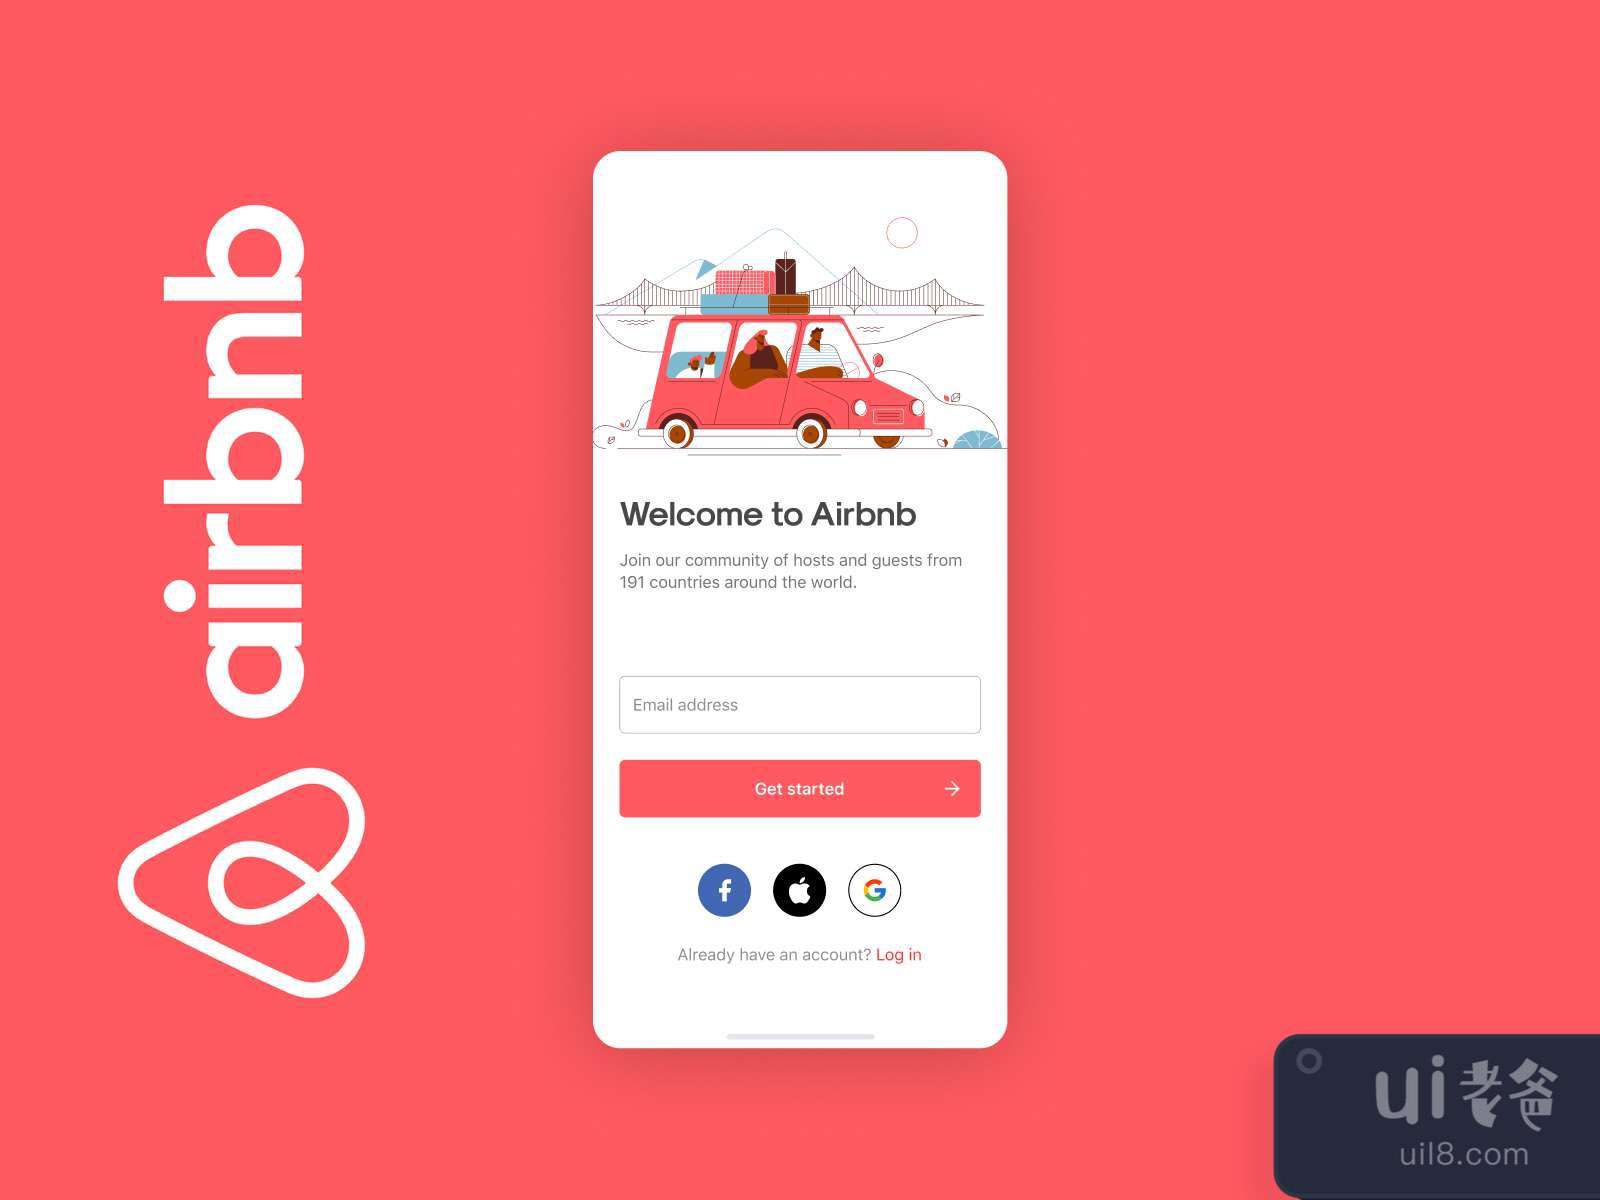 Airbnb Hotel Booking for Figma and Adobe XD No 3